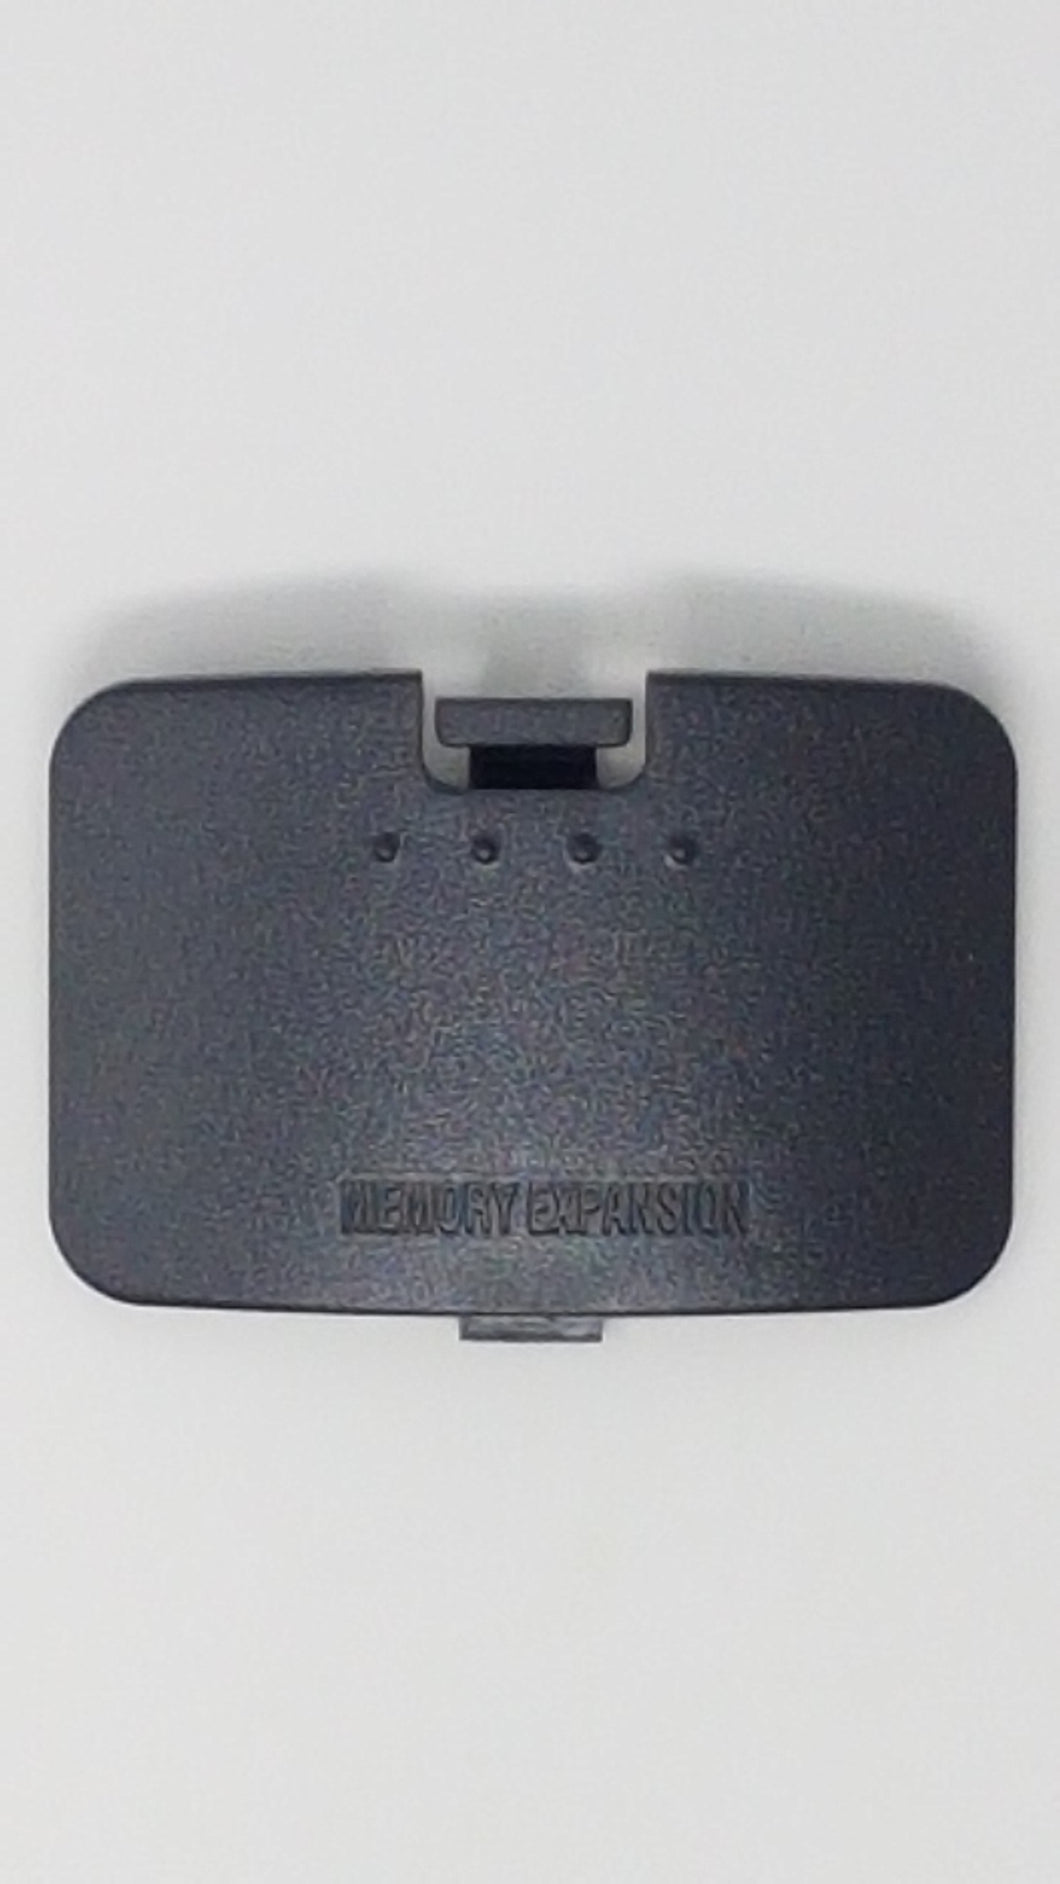 REPLACEMENT MEMORY EXPANSION PAK COVER DOOR FOR NINTENDO 64 | N64